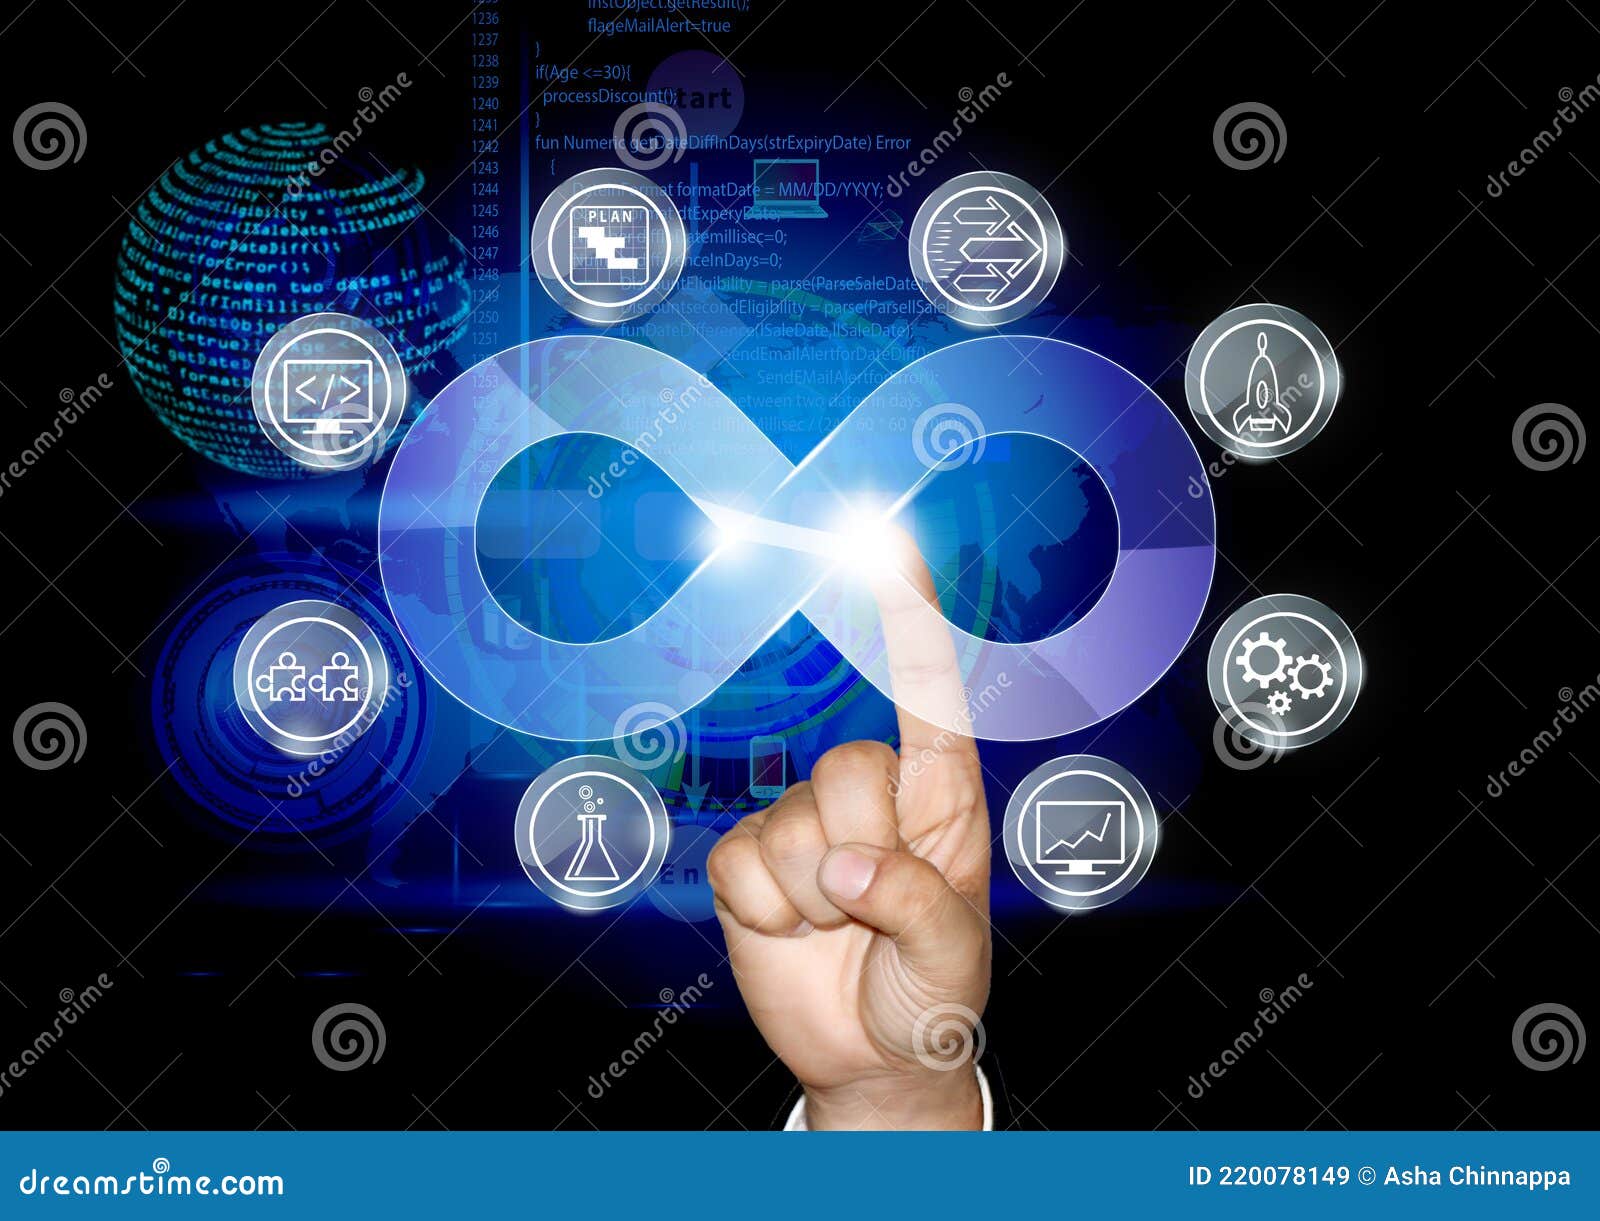 concept of devops, the business man initiating devops process through screen touch